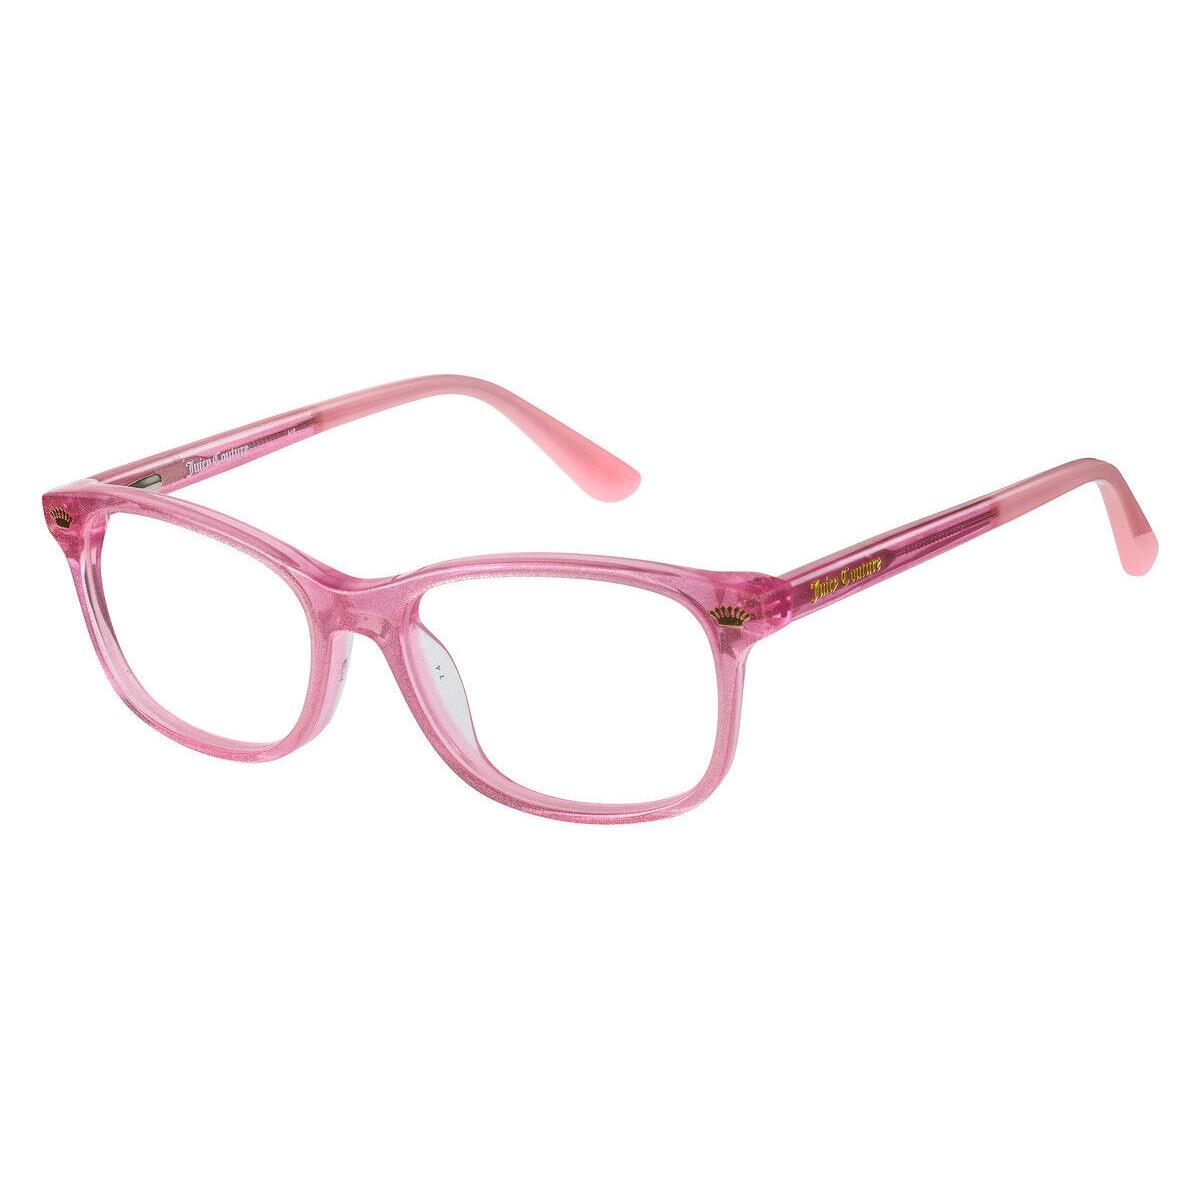 Juicy Couture 933 Eyeglasses 0W66 Pink Glitter Rectangle 48mm